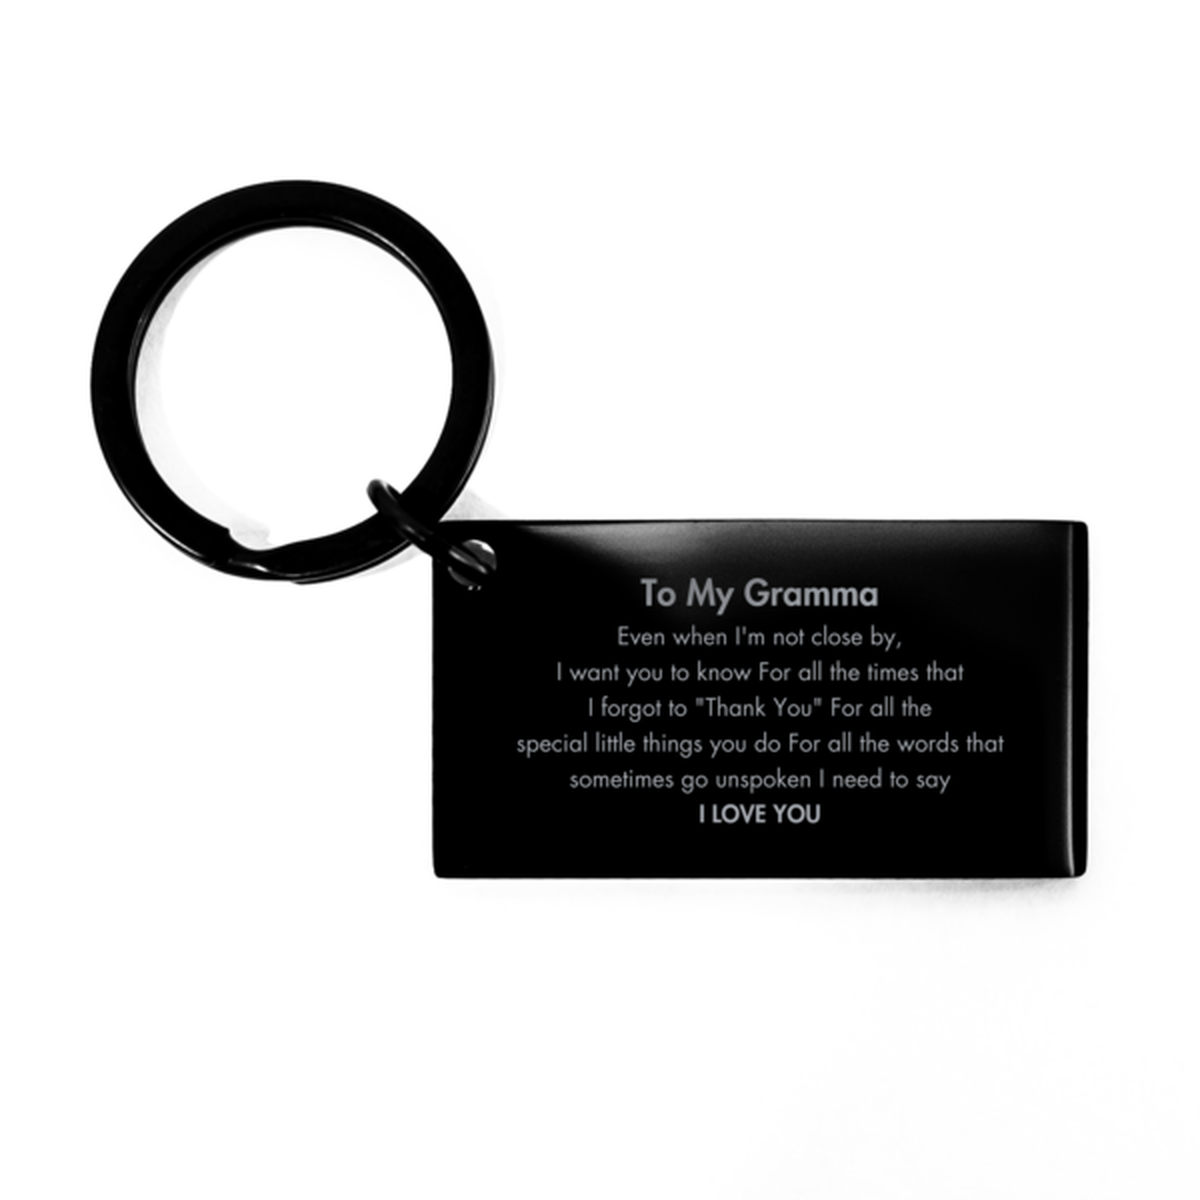 Thank You Gifts for Gramma, Keepsake Keychain Gifts for Gramma Birthday Mother's day Father's Day Gramma For all the words That sometimes go unspoken I need to say I LOVE YOU